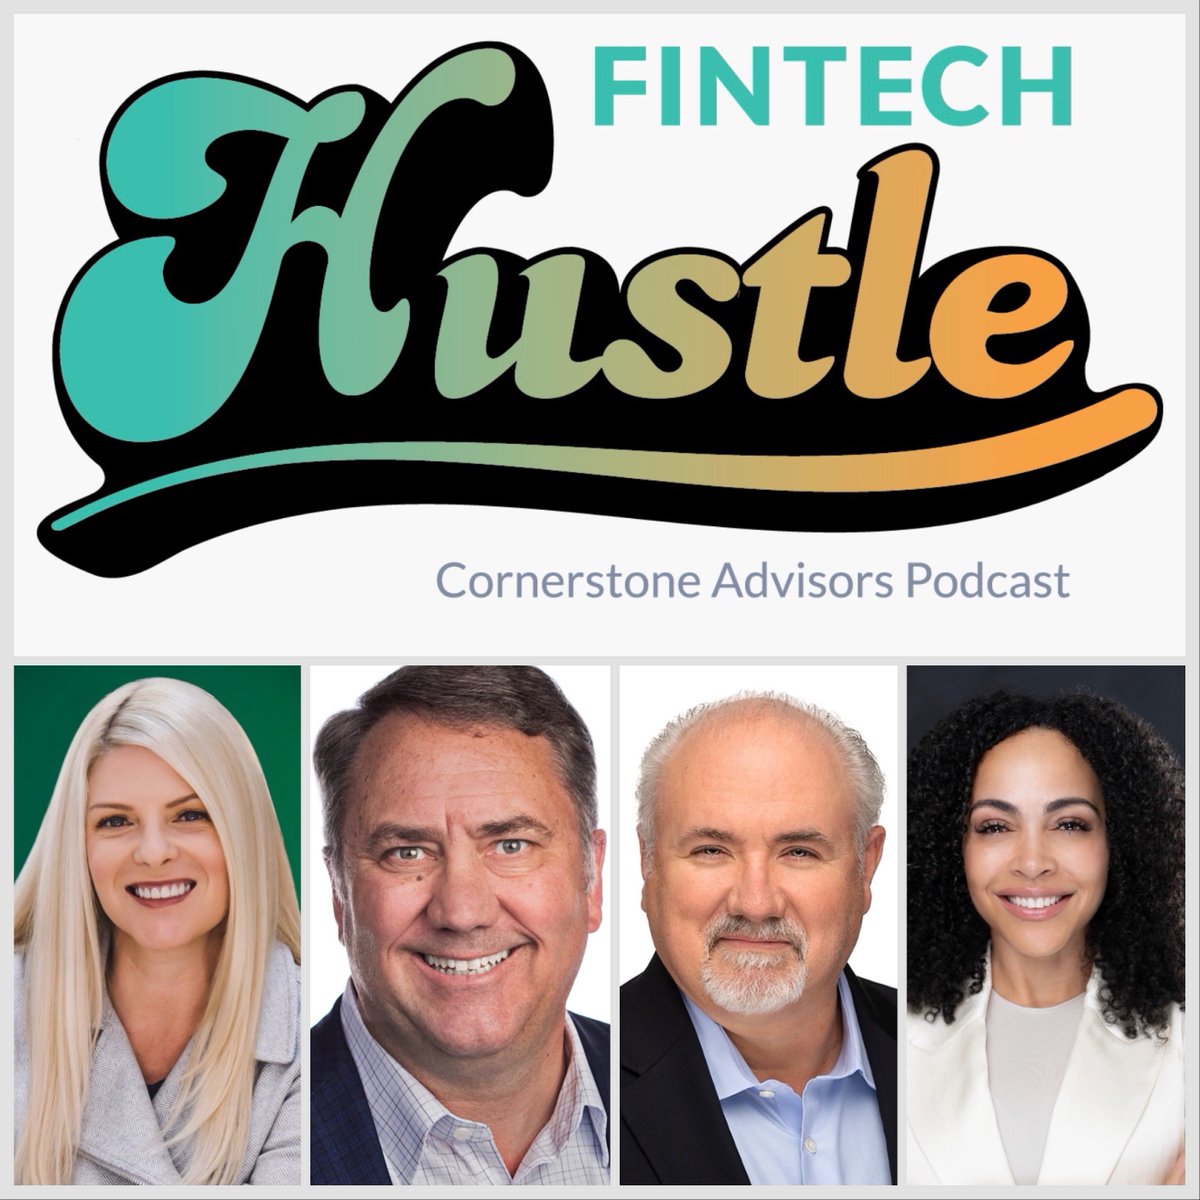 Looking forward to @AFTWeb summit next week with Stacey Bryant & @rshevlin and dropping a new #Fintech #Hustle IN THE HALL with industry rockstars Tiffany Matthews, Jeff Harper, Mark Forbis, with Stacey co-hosting. Check it out at --> crnrstone.com/fintech-hustle